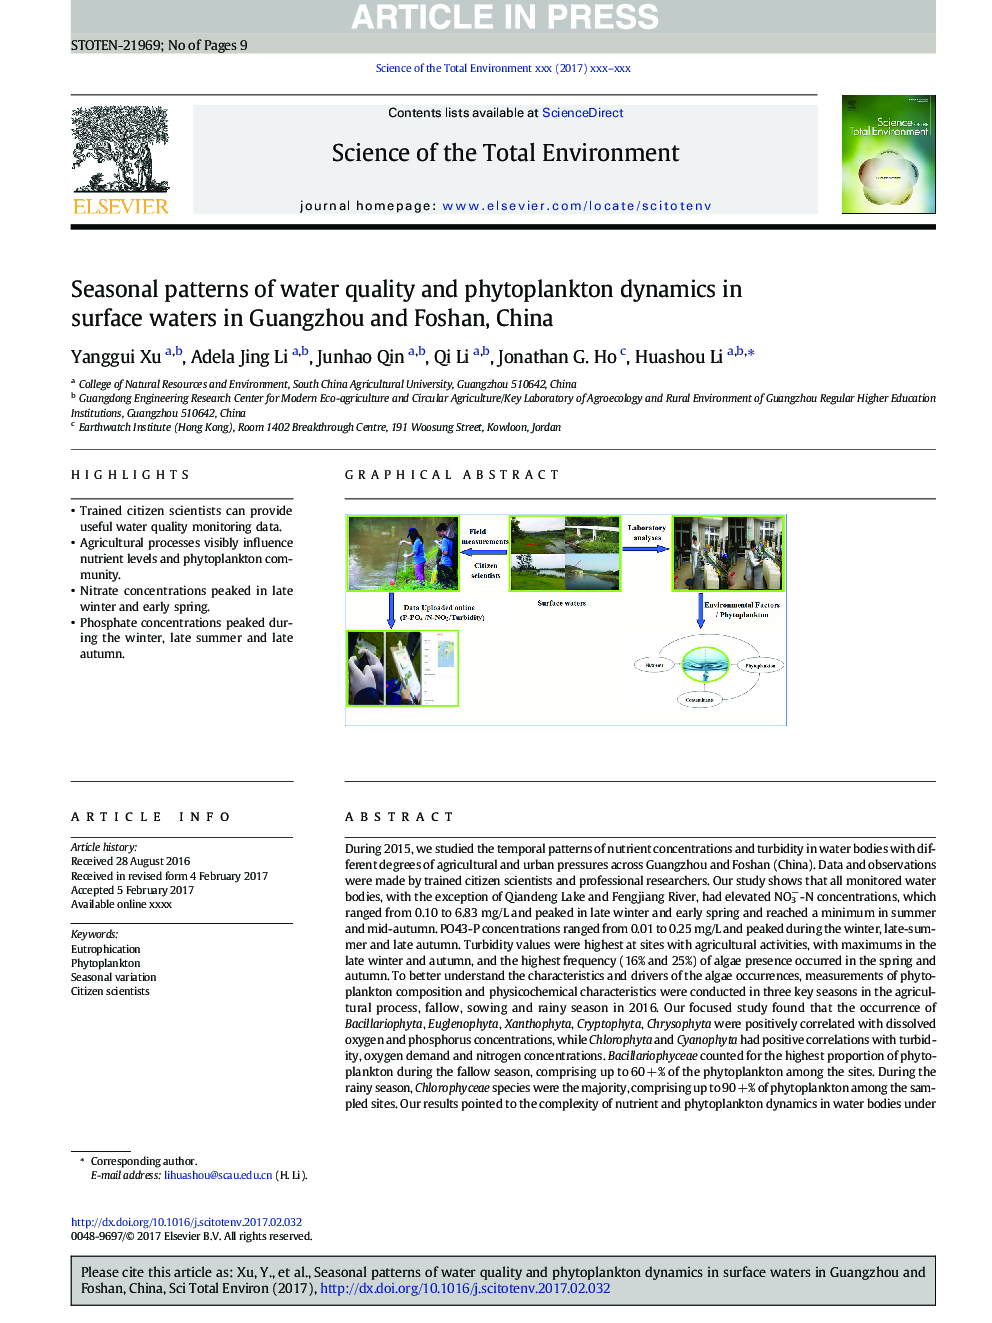 Seasonal patterns of water quality and phytoplankton dynamics in surface waters in Guangzhou and Foshan, China